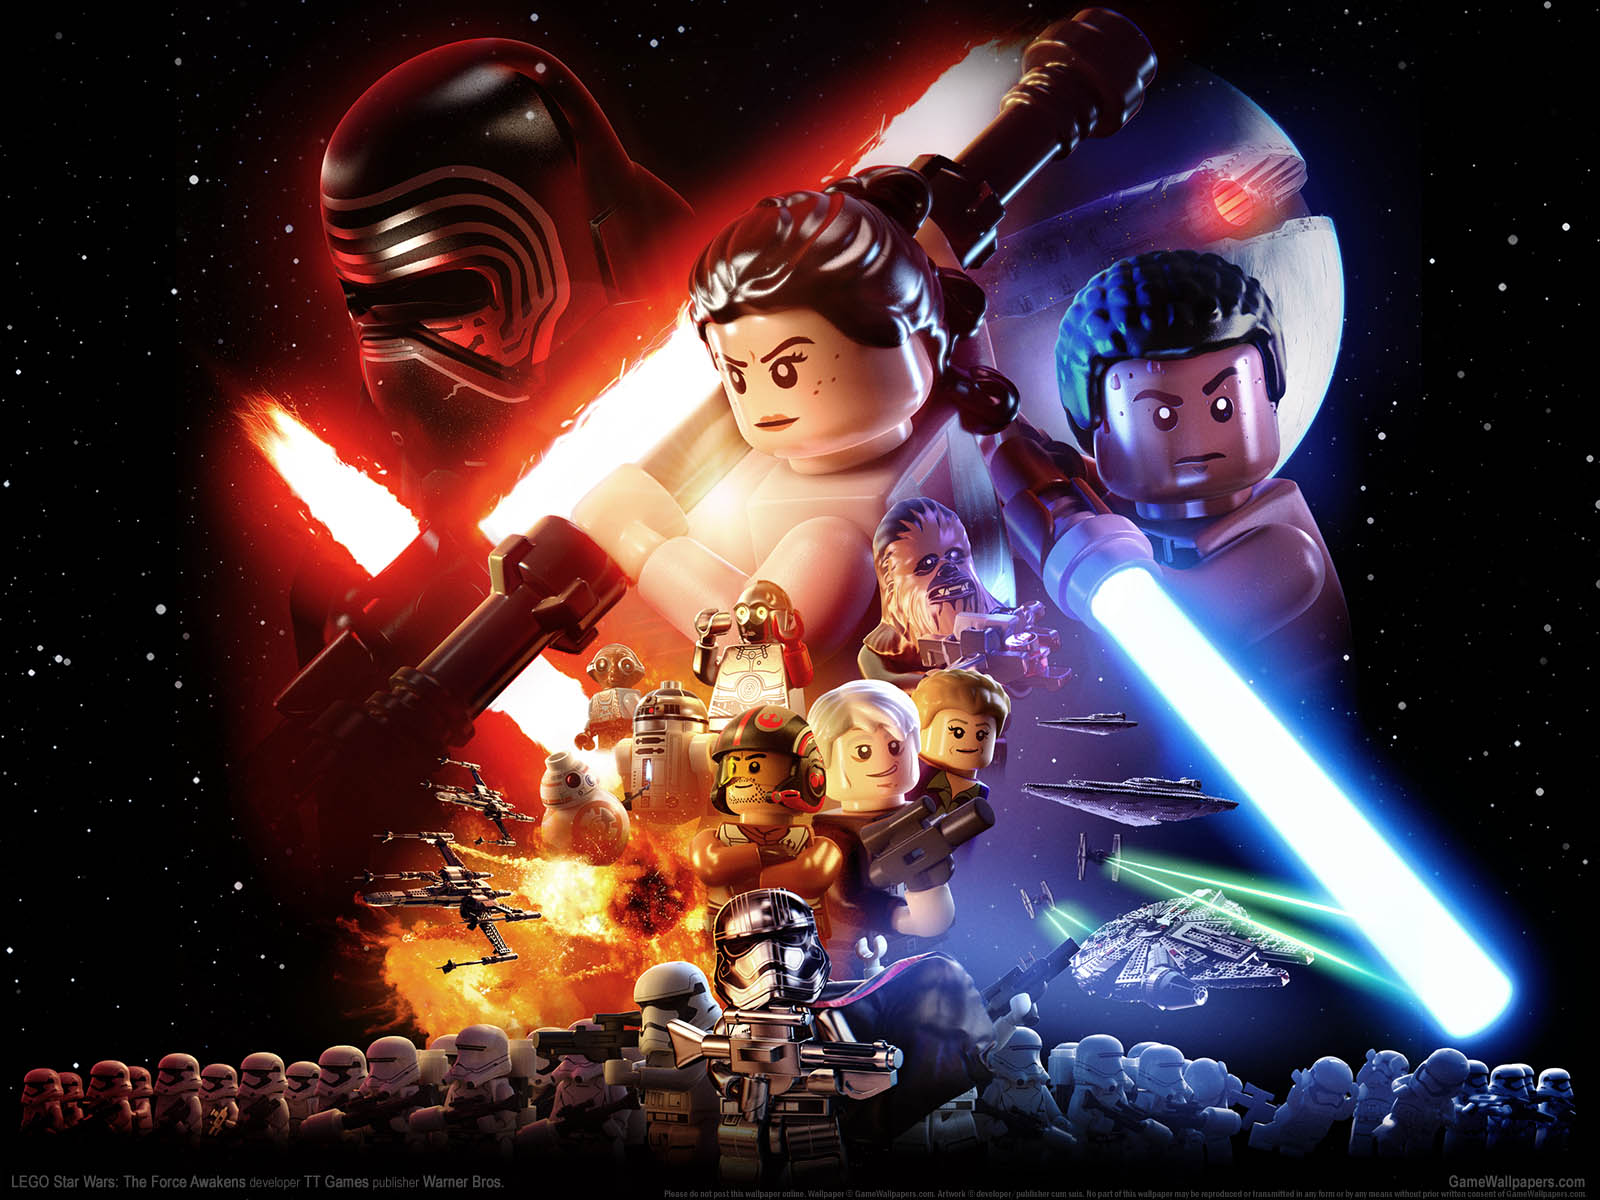 LEGO Star Wars%253A The Force Awakens achtergrond 01 1600x1200